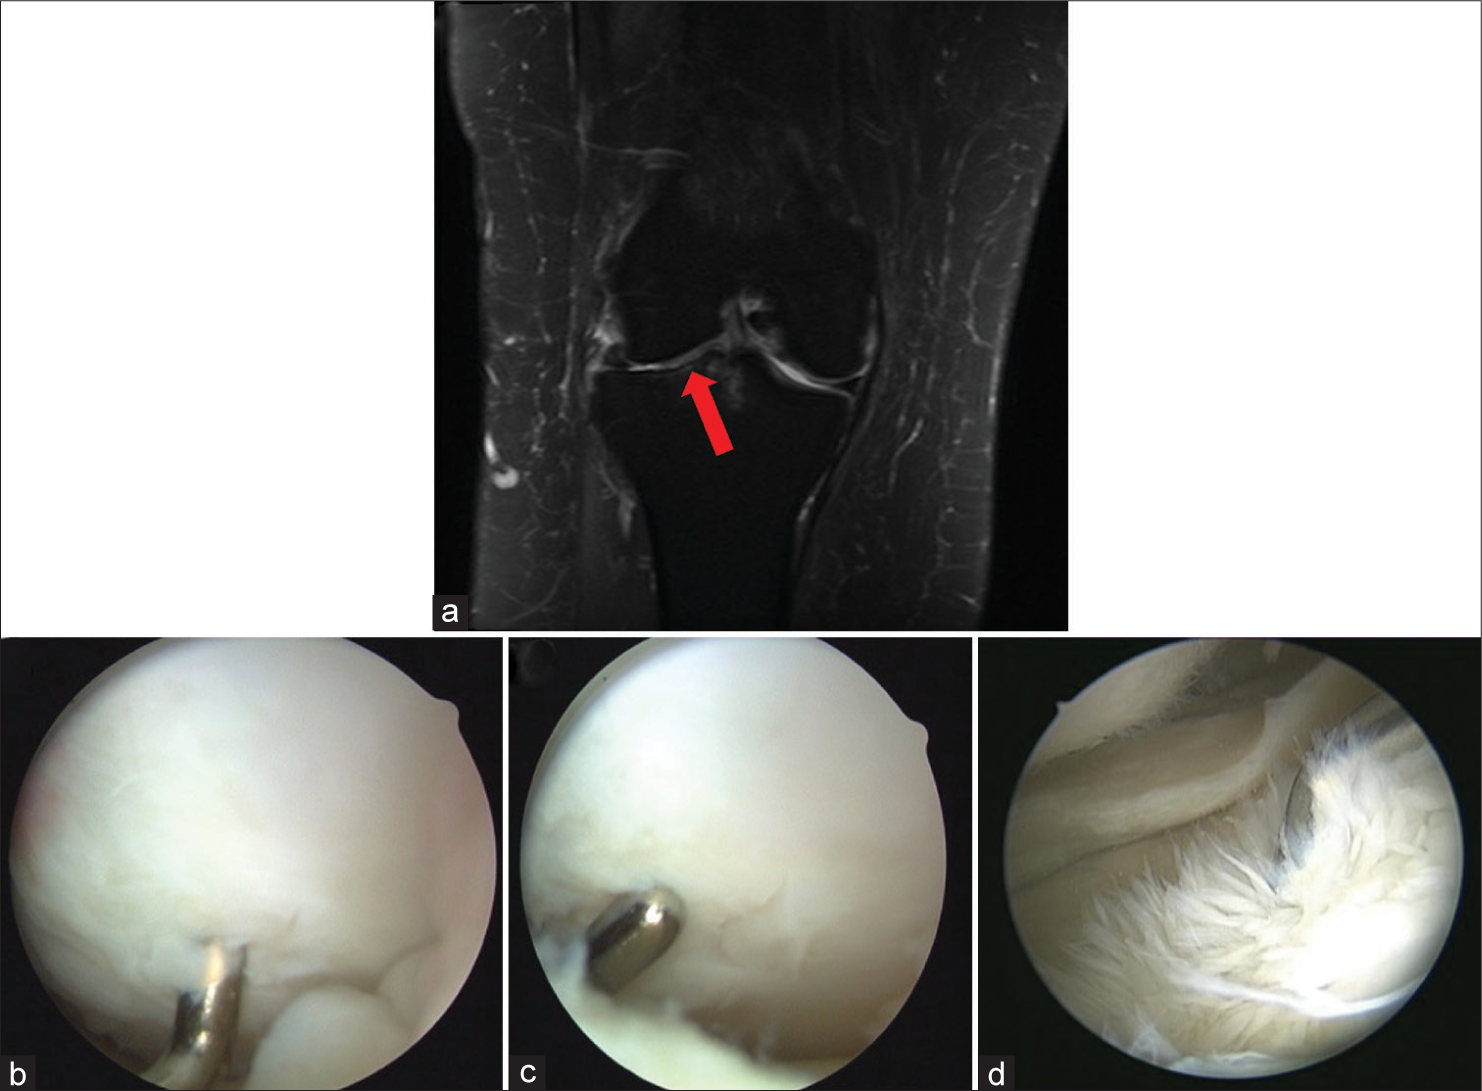 A 42-year-old female presented complaining of recurrent episodes of sharp pain in her left knee, exacerbated by prolonged walking or standing. She also reported occasional catching sensations but denied any locking or giving way. The pain had been progressively worsening over the past year. She recalled a minor twisting injury to the knee about 18 months ago, but there was no significant swelling or bruising at the time. (a) Coronal T2-weighted image of a right knee demonstrates grade II and III chondral lesions of the femoral and tibial surfaces of the lateral compartment (red arrow). (b and c) demonstrate a grade II chondral lesion of the lateral femoral condyle. (d) A significantly fibrillated grade III chondral lesion of the tibial surface.